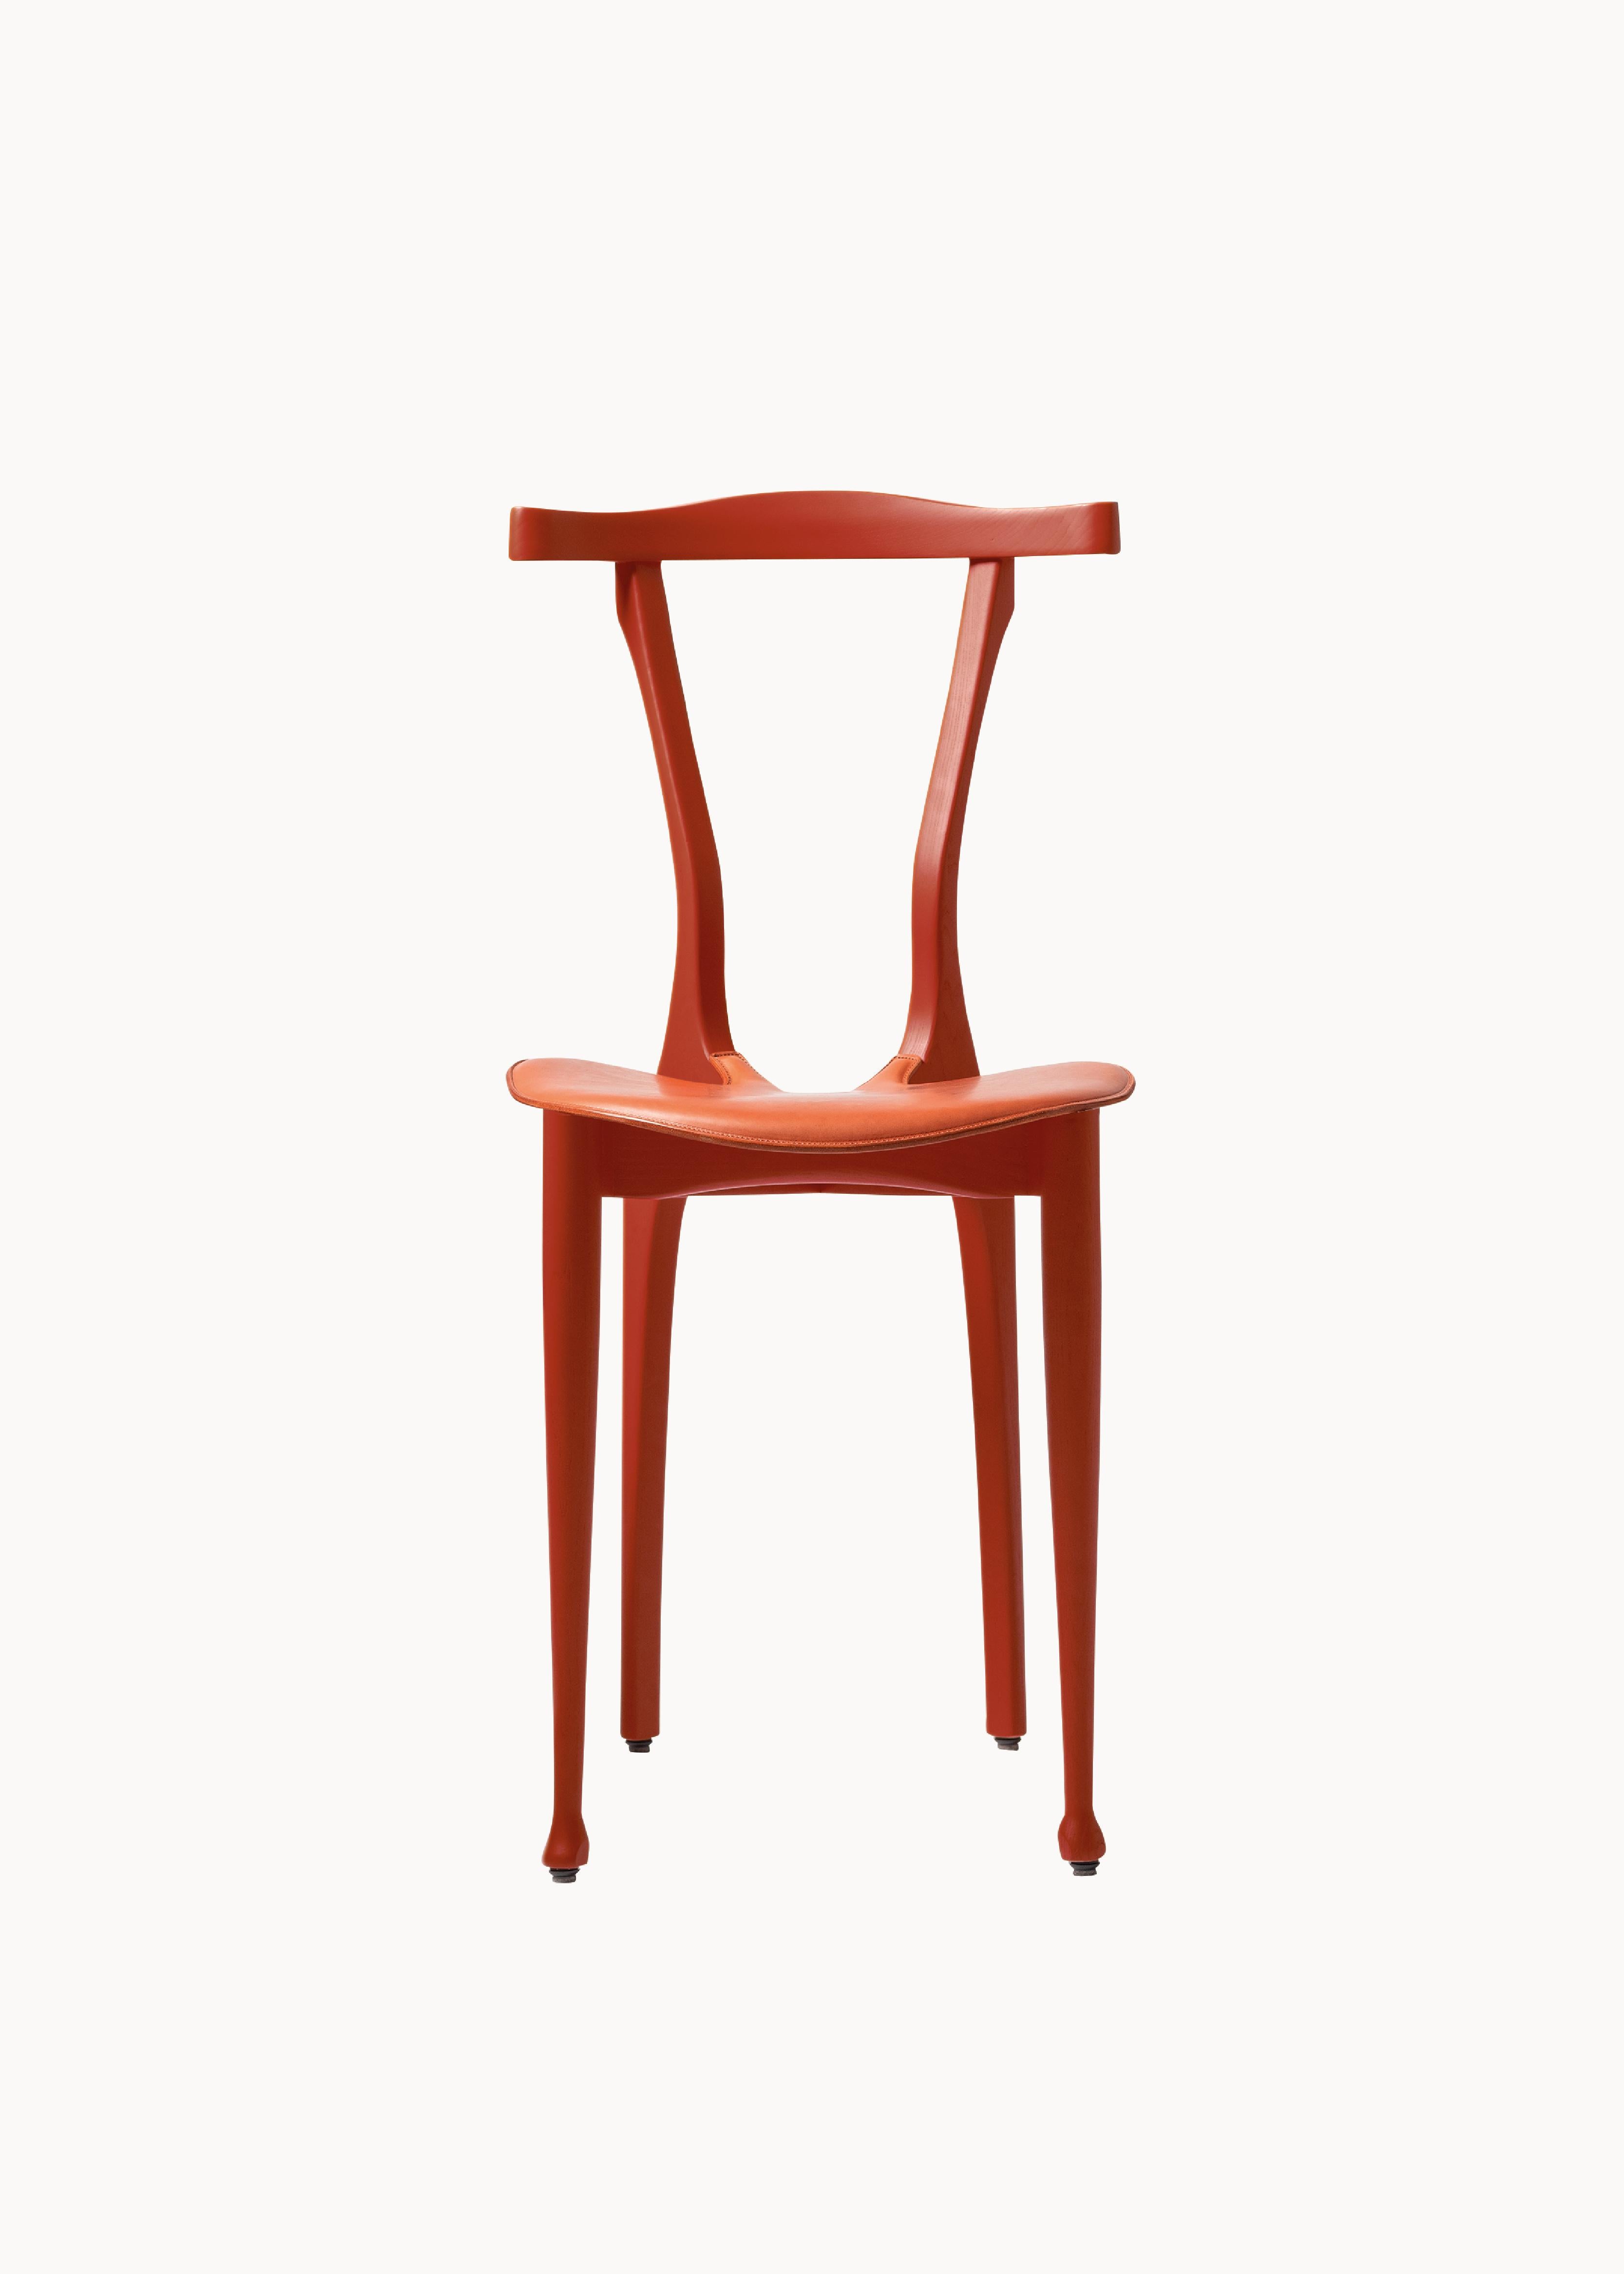 Gaulinetta dining chair by Oscar Tusquets red Lacquered Ash wood, contemporary  For Sale 5